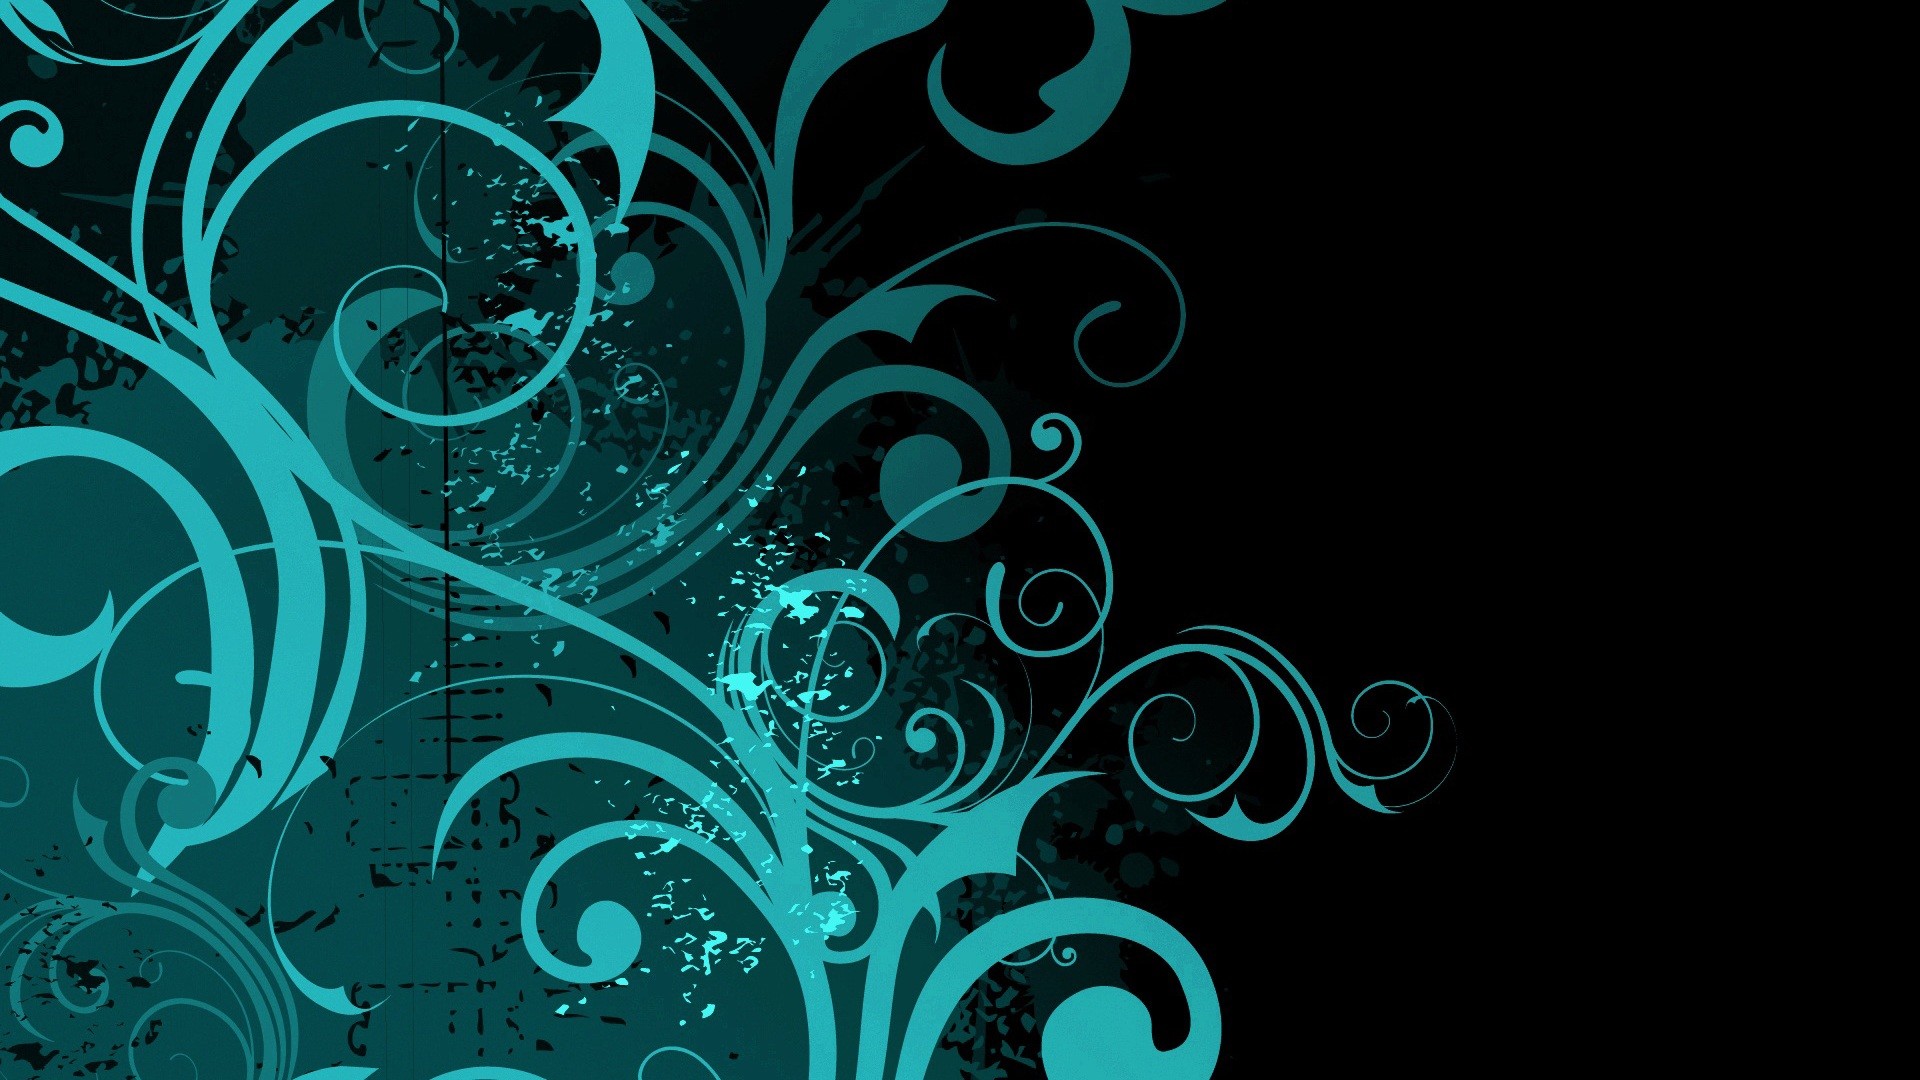 1920x1080 Blue and Black Abstract Backgrounds for Presentation - PPT Backgrounds  Templates